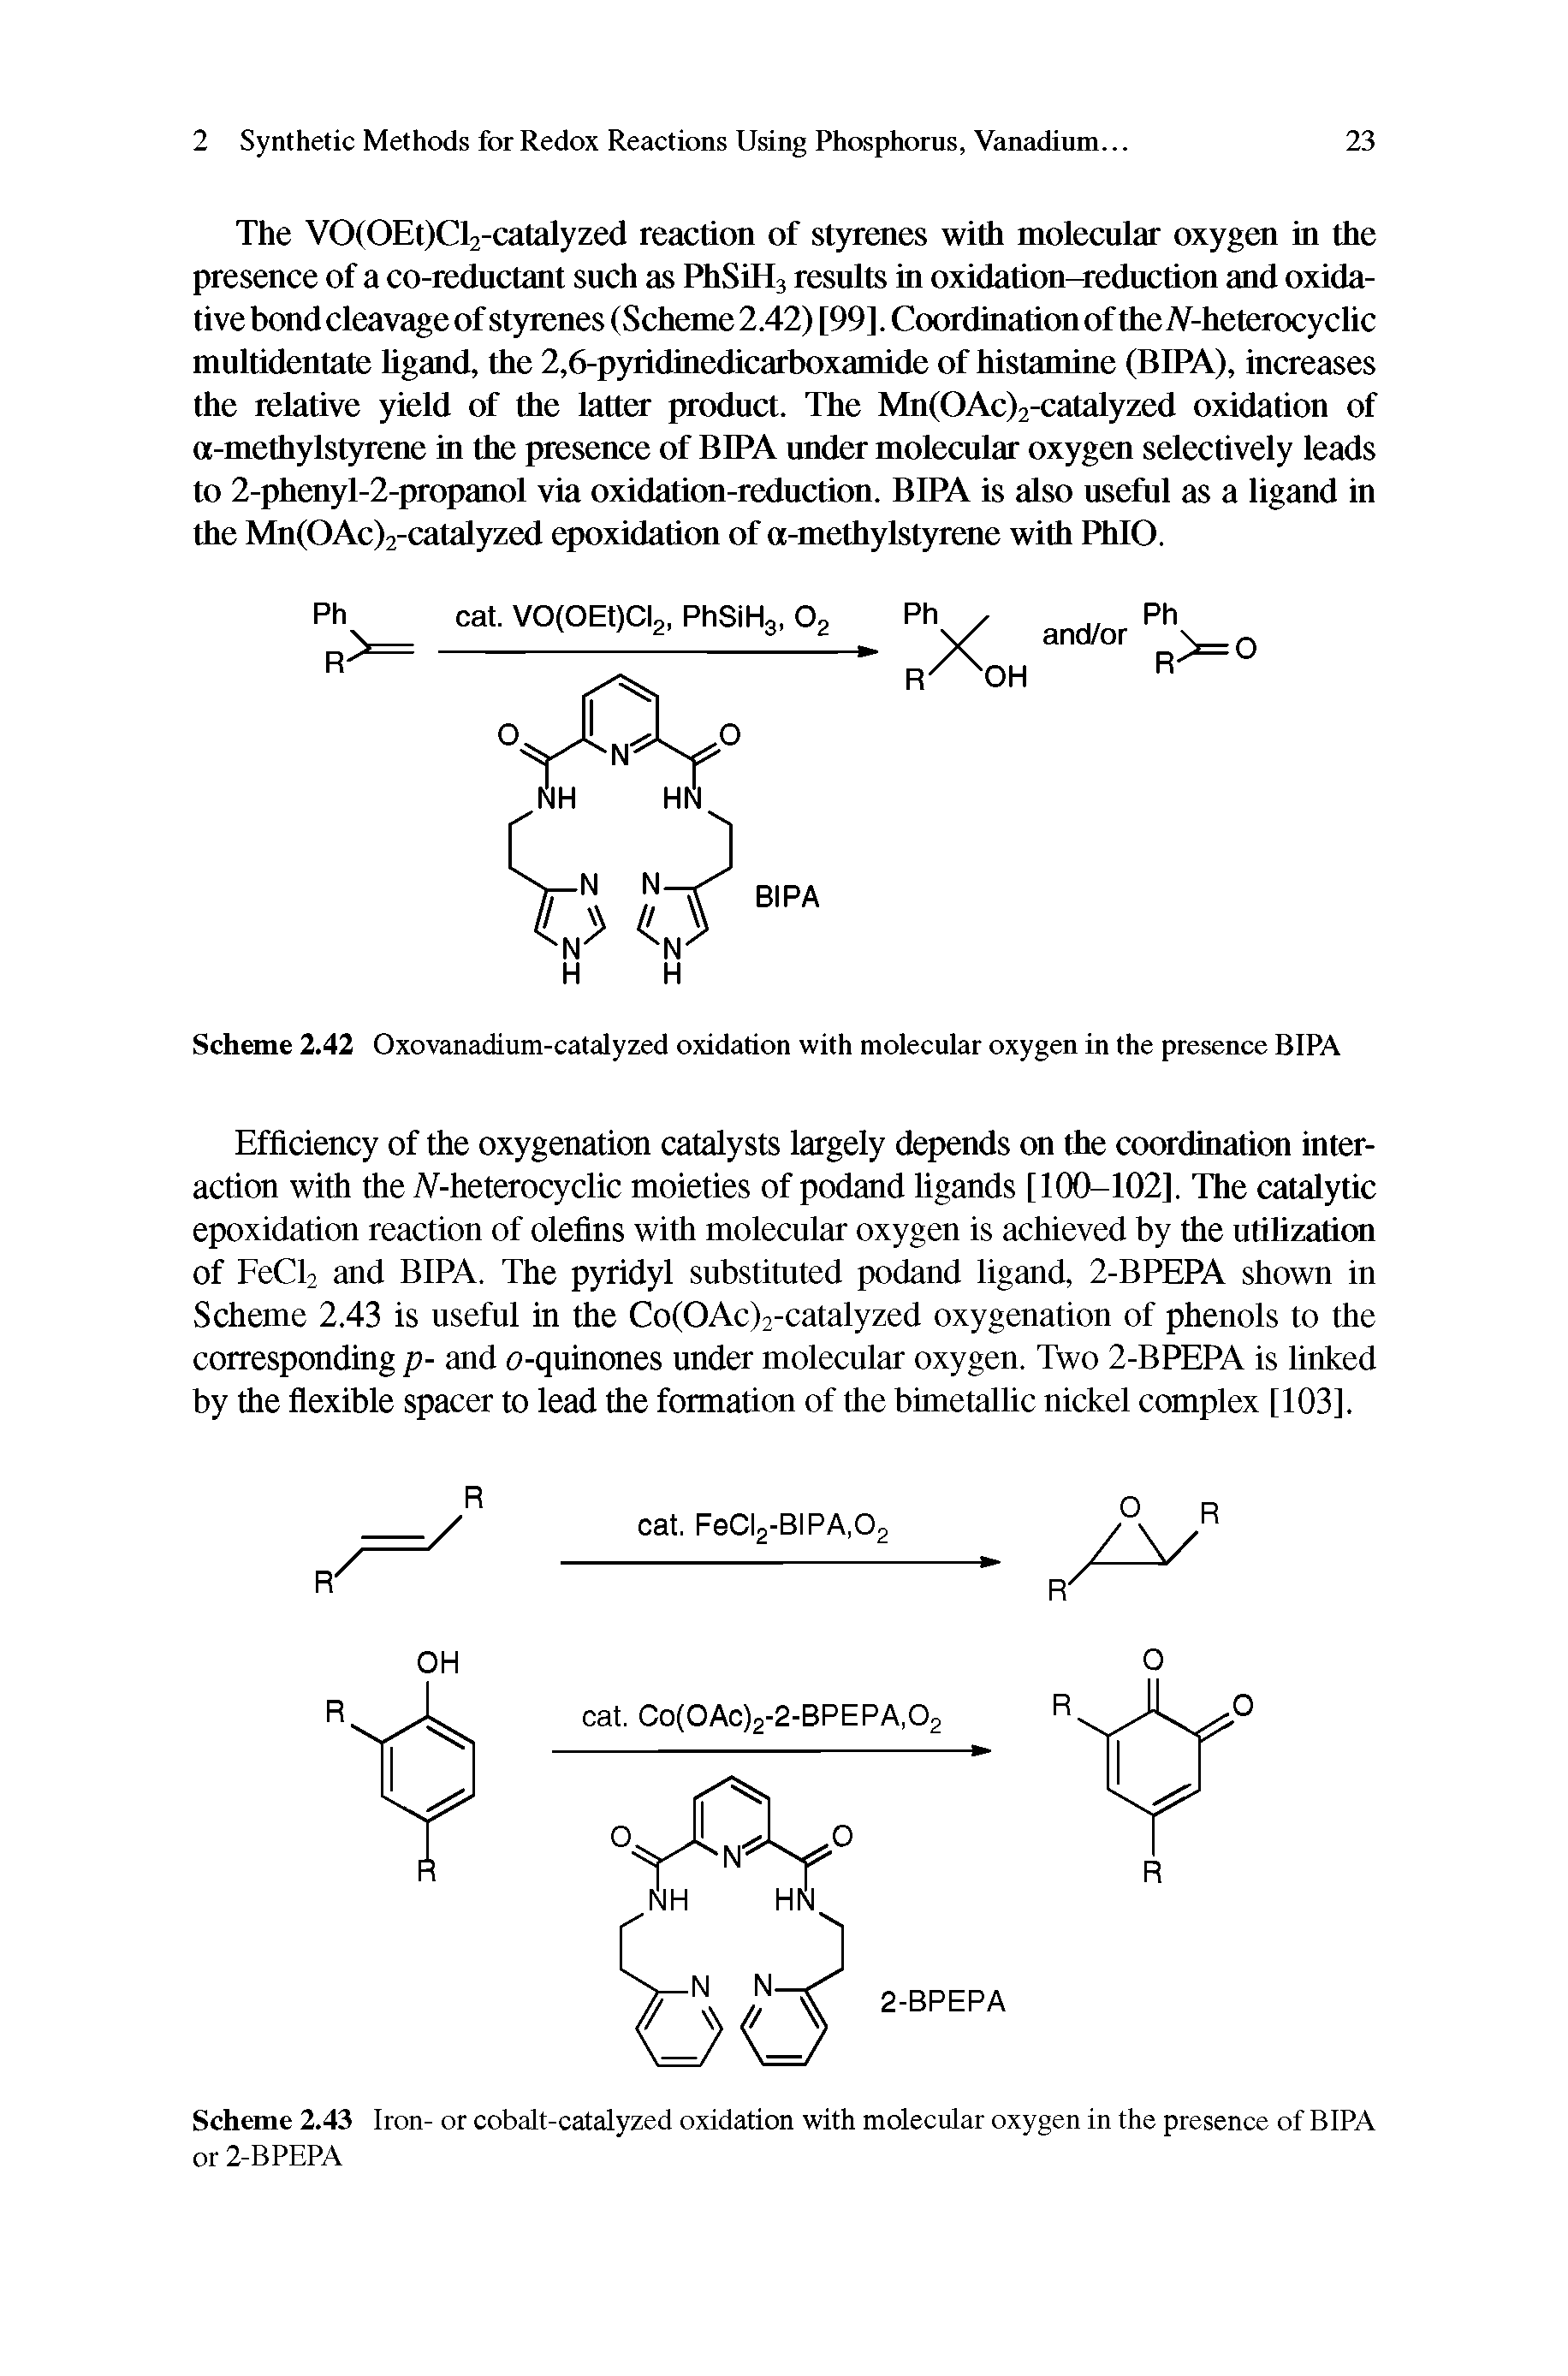 Scheme 2.43 Iron- or cobalt-catalyzed oxidation with molecular oxygen in the presence of BIPA or 2-BPEPA...